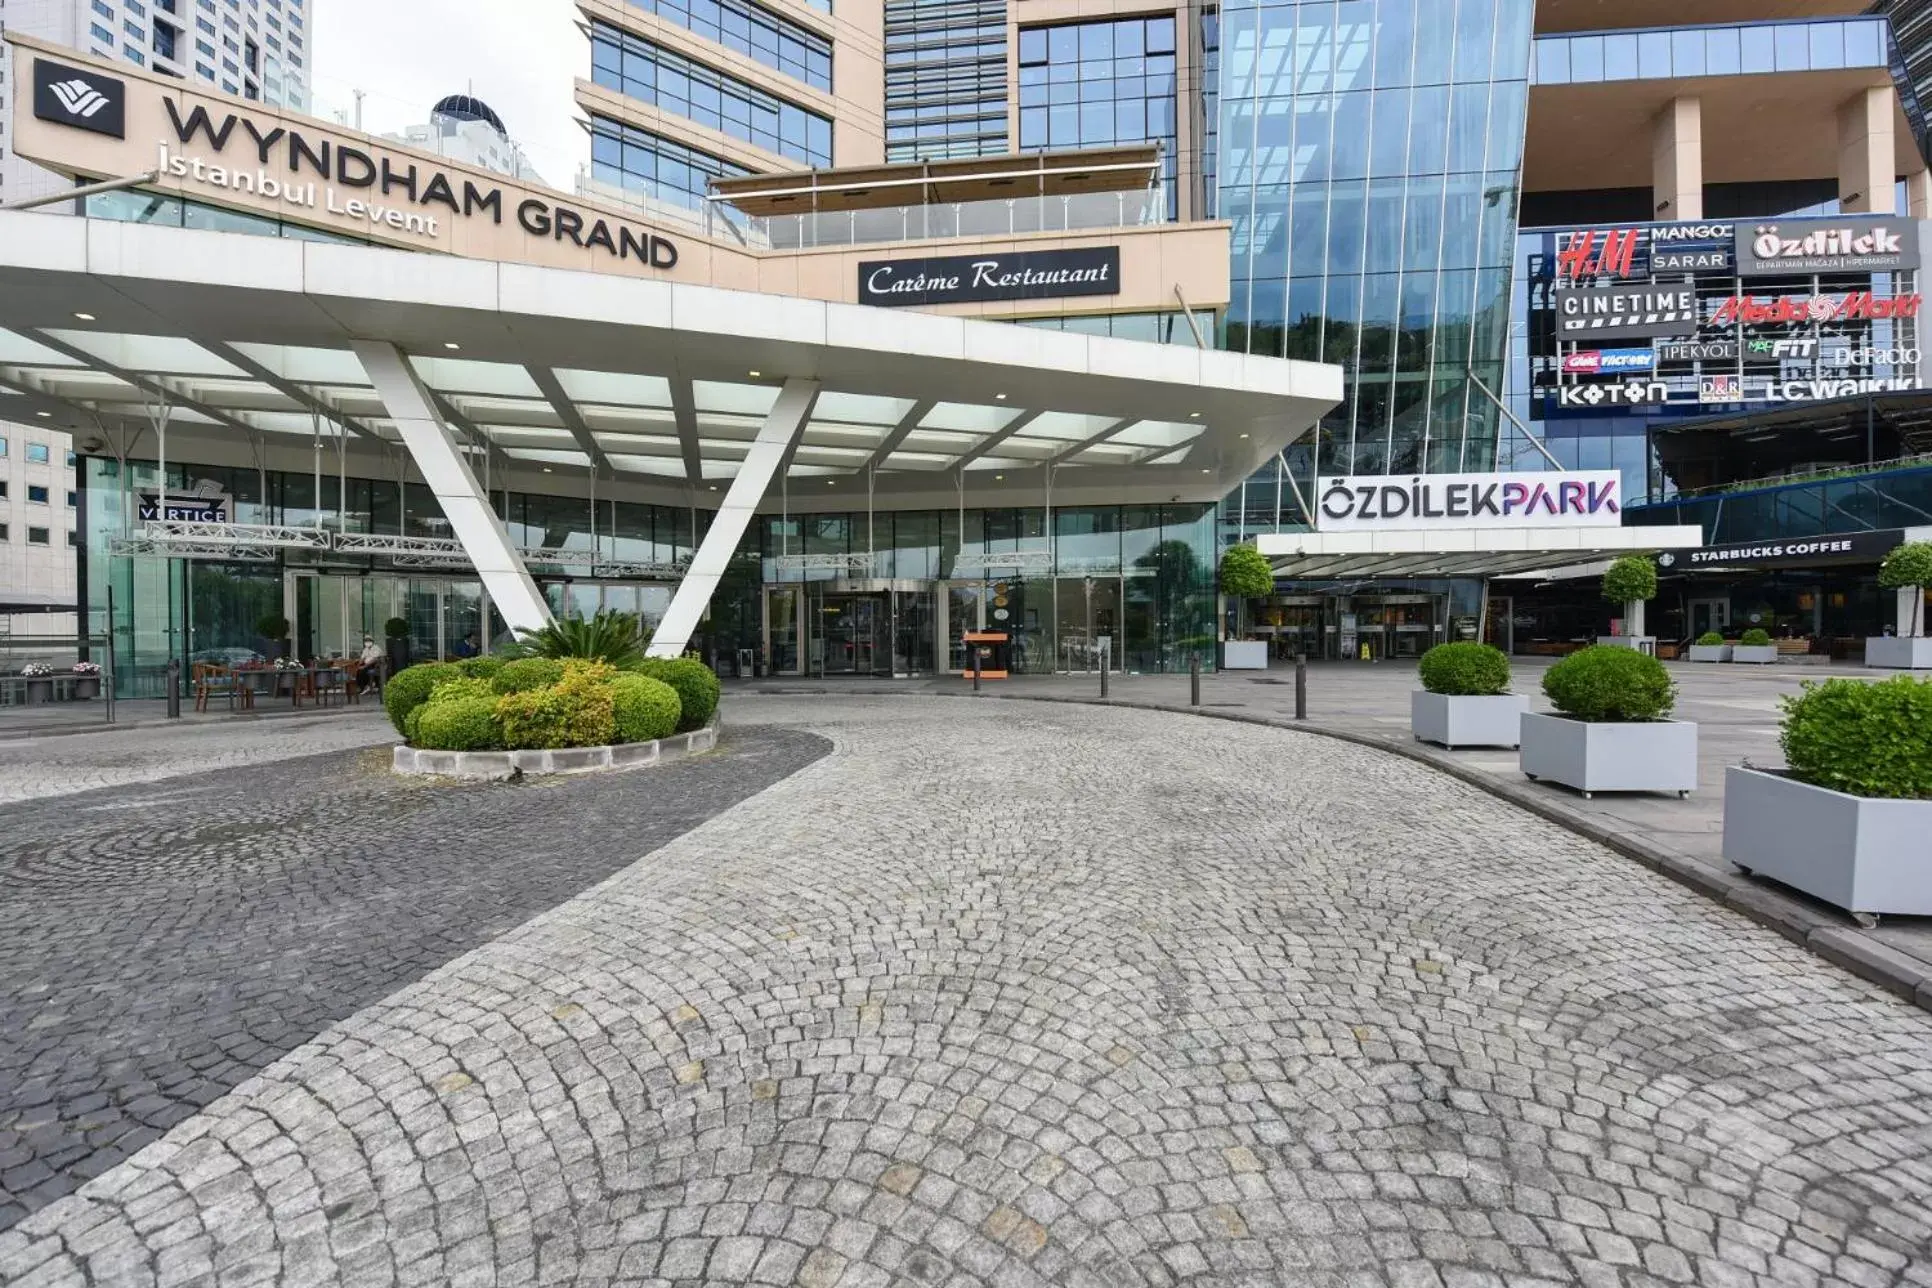 Property building in Wyndham Grand Istanbul Levent